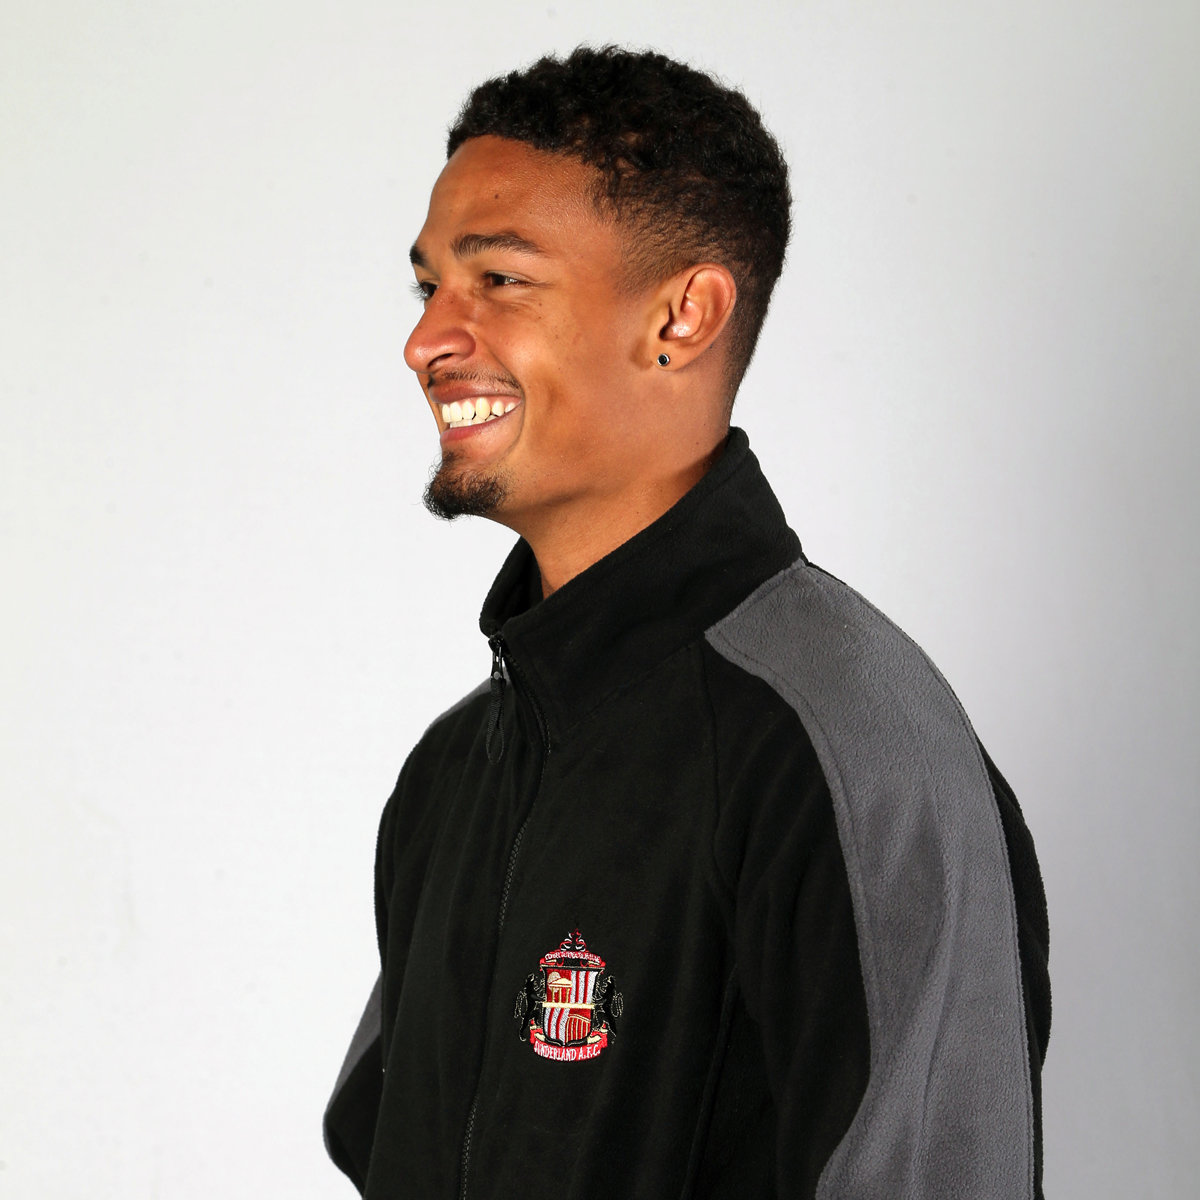 Buy the SAFC Two Tone Fleece online at Sunderland AFC Store